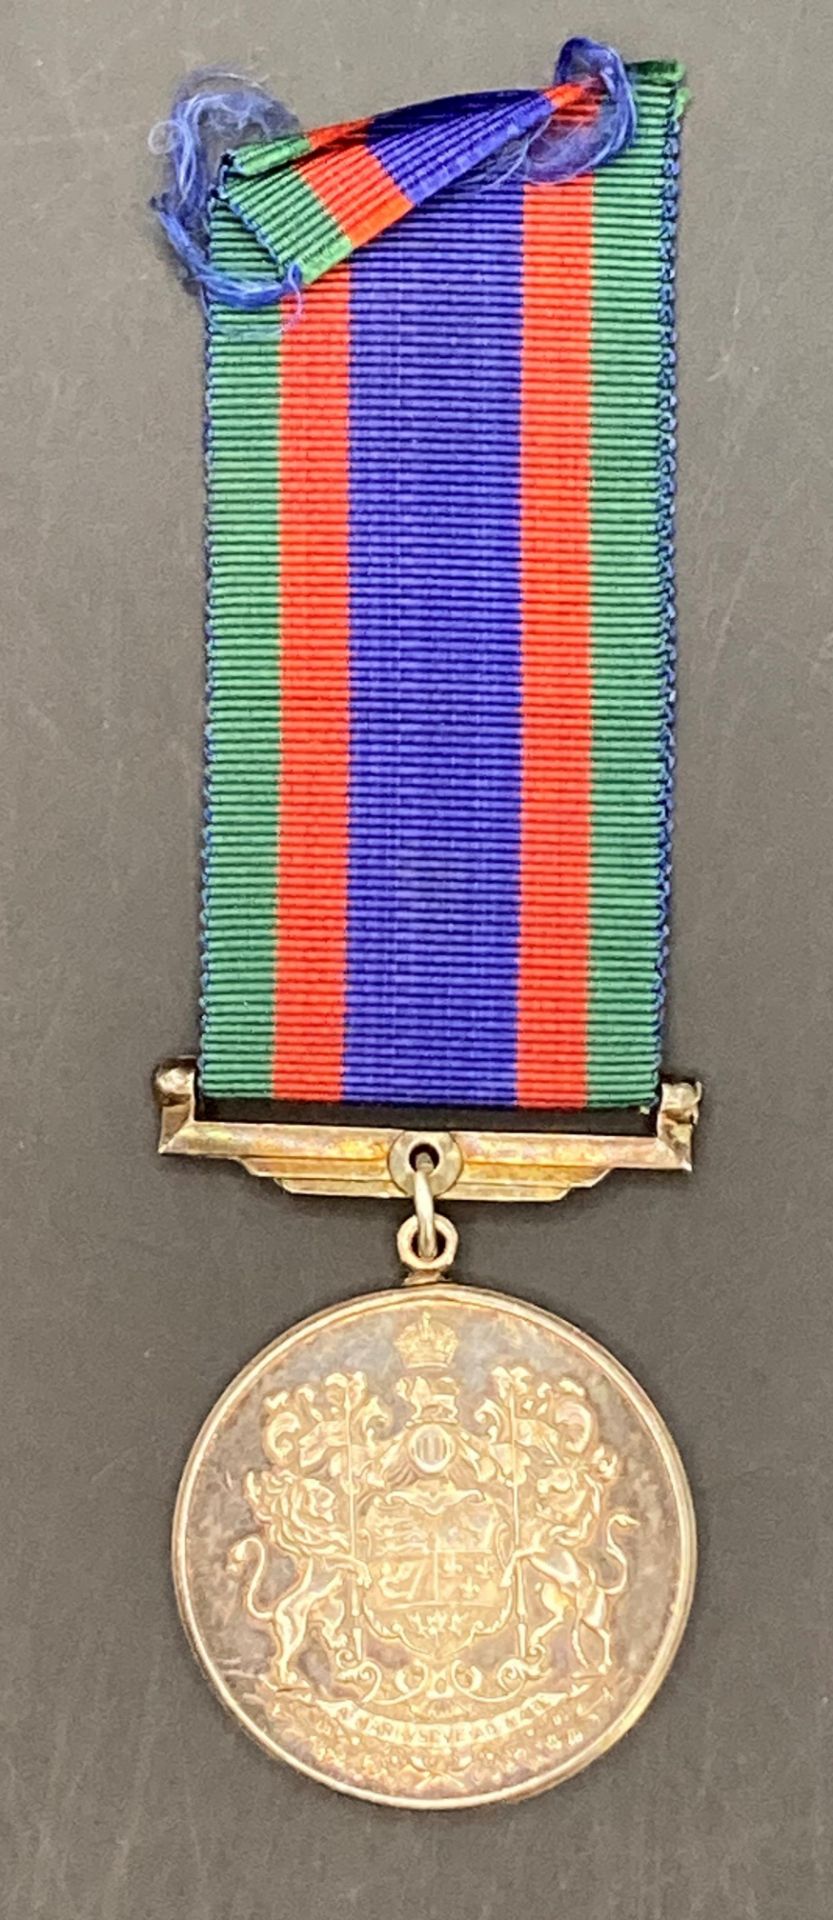 Canada Volunteer Service Medal 1939-1945 with ribbon (unnamed) (Saleroom location: S3 GC5) - Image 2 of 2